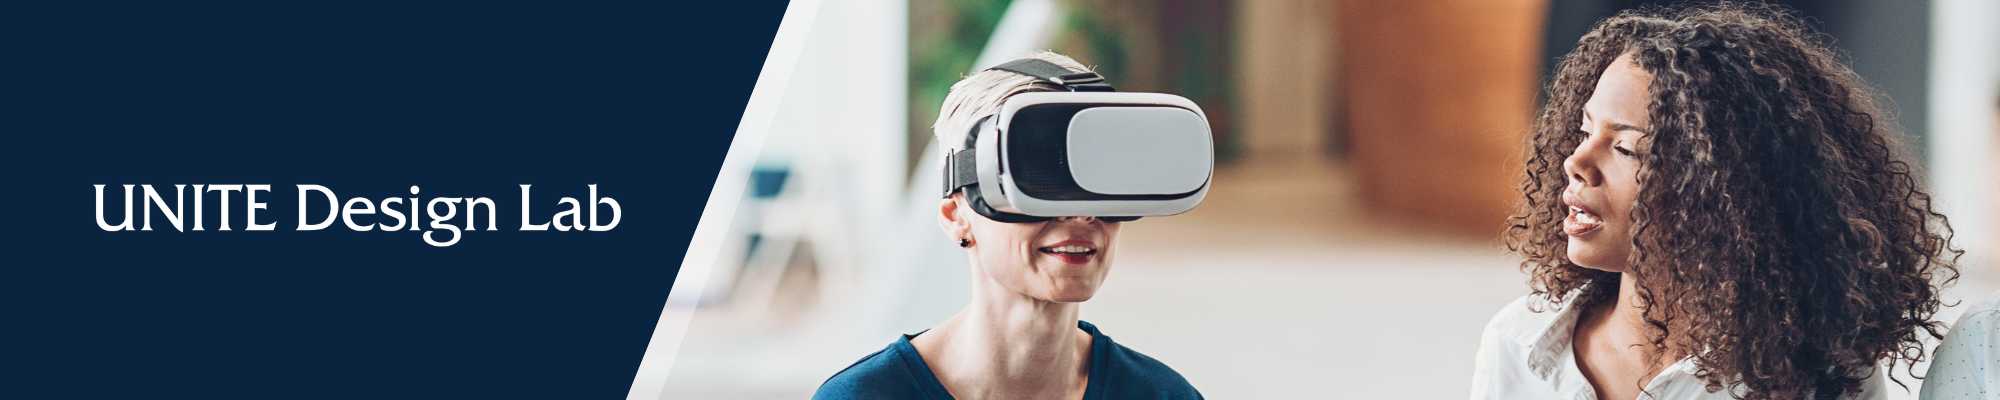 UDL Banner with two women using Virtual Reality goggles